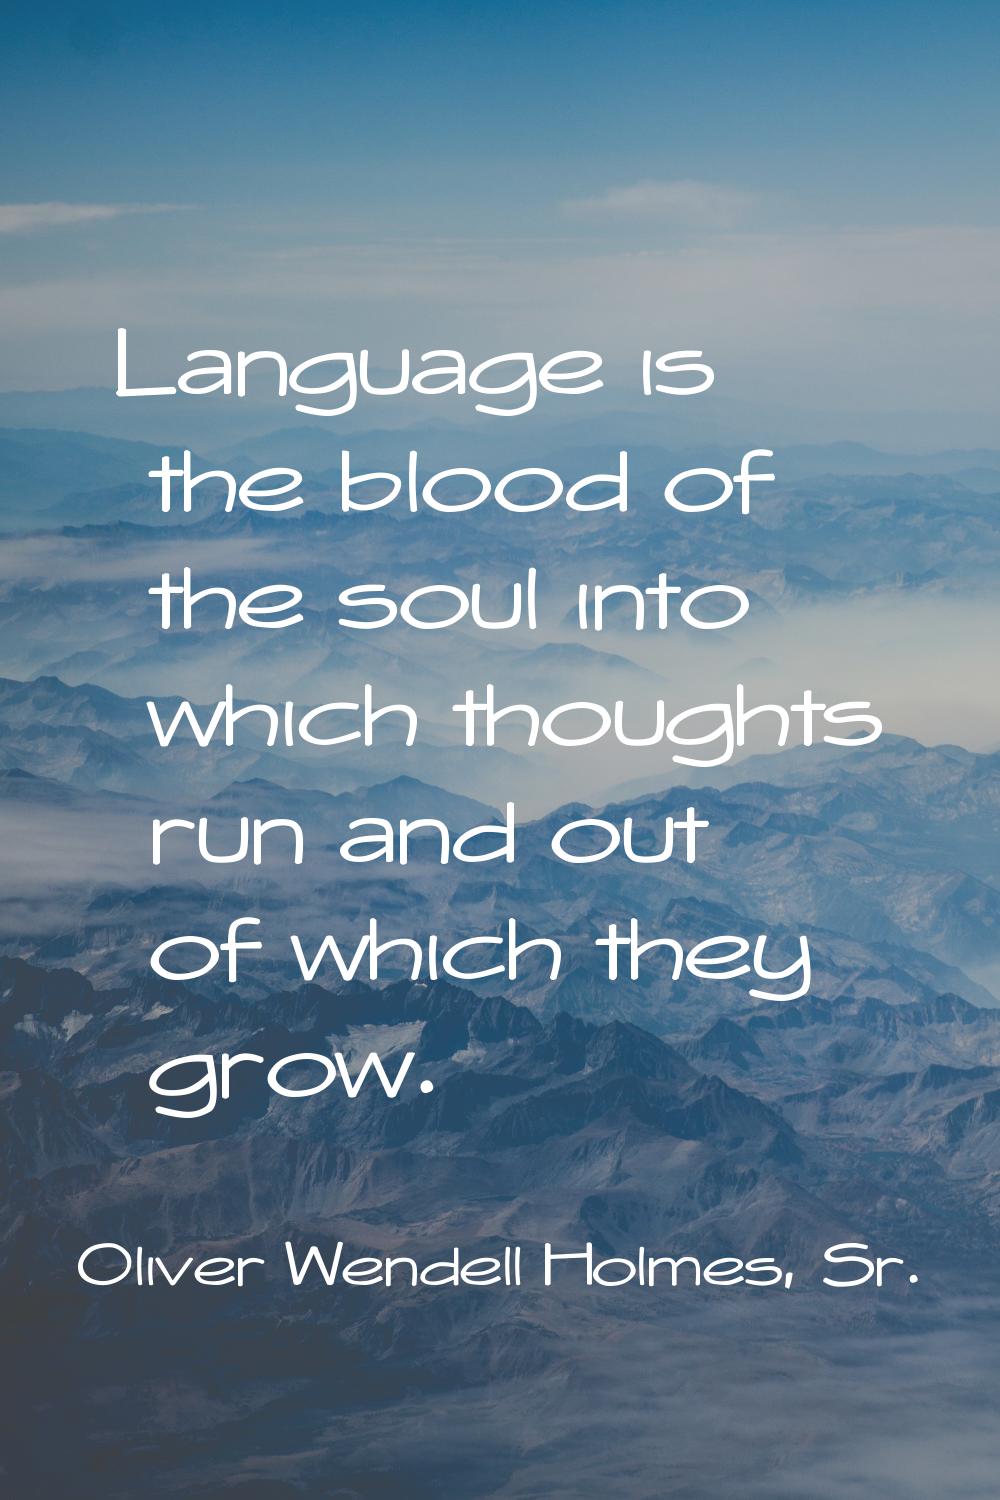 Language is the blood of the soul into which thoughts run and out of which they grow.